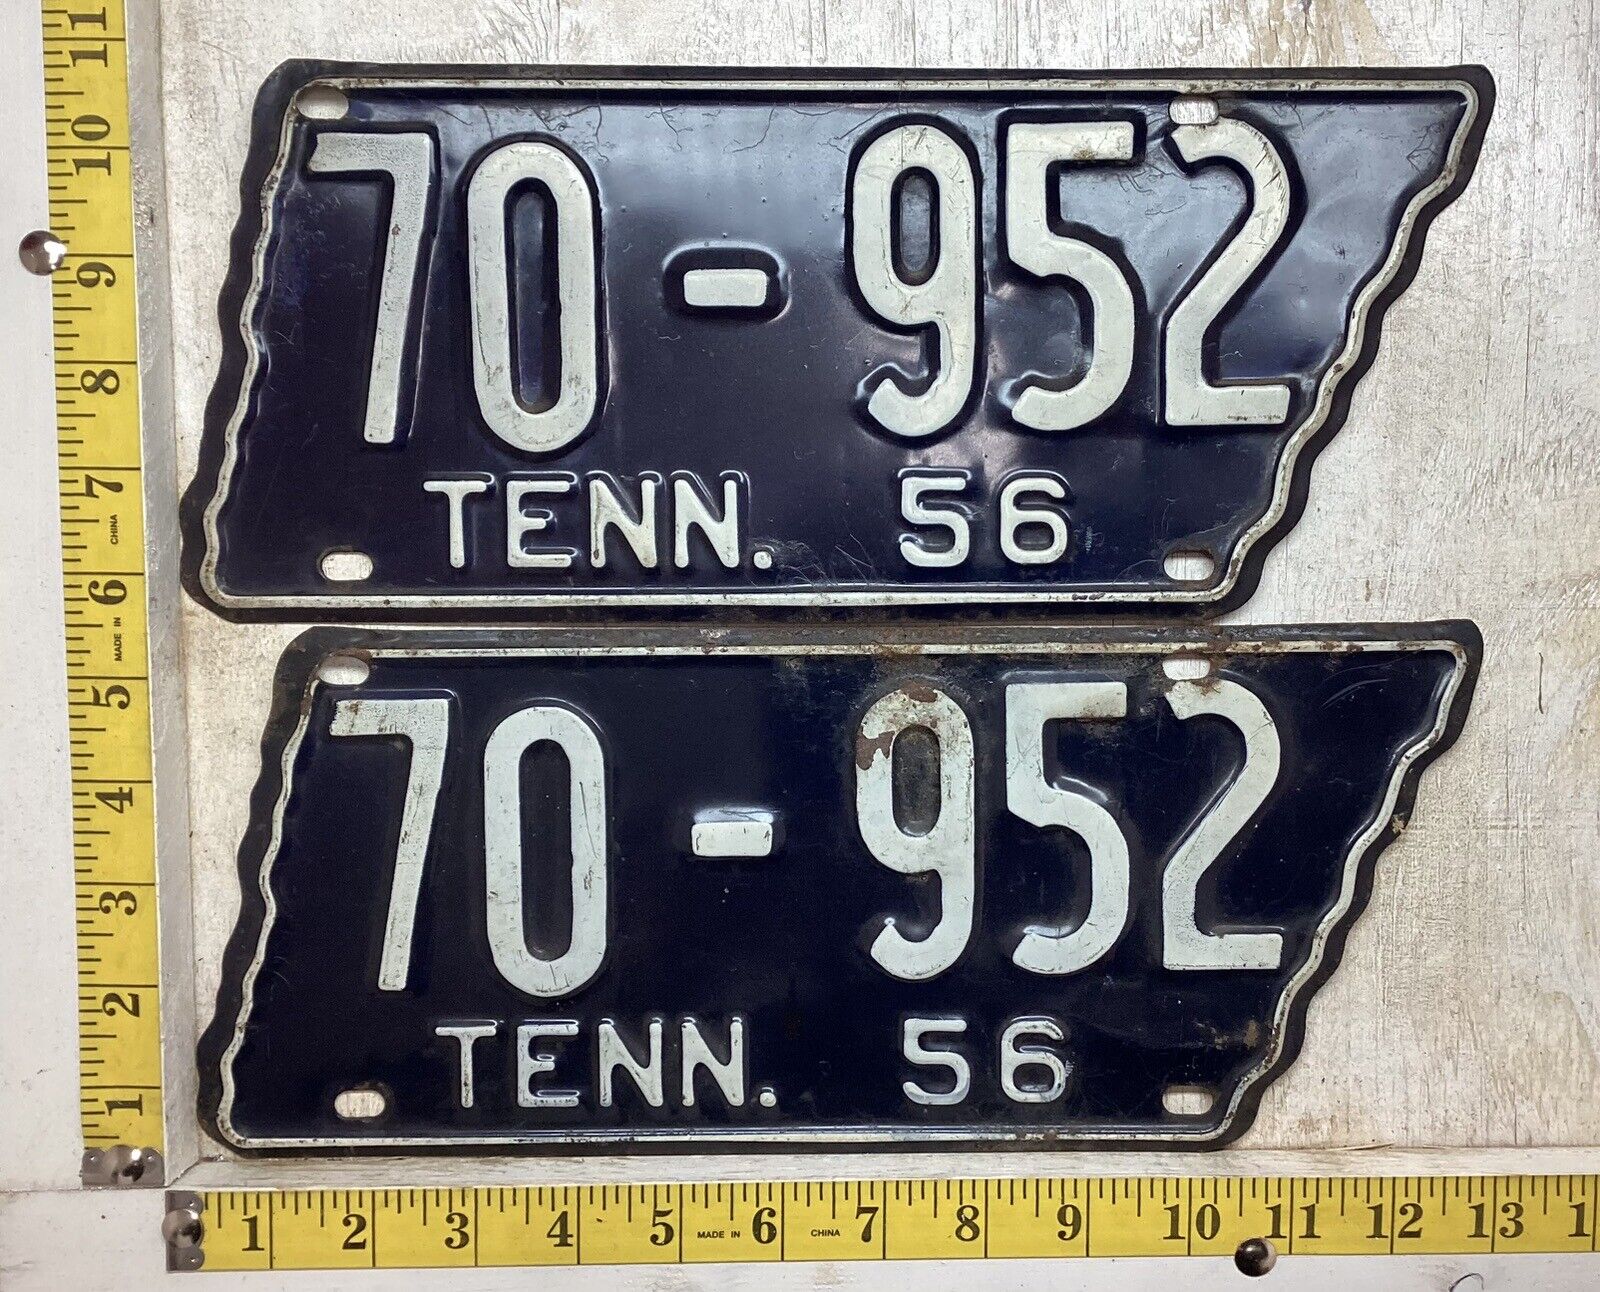 1956 Tennessee State Shaped License Plate 